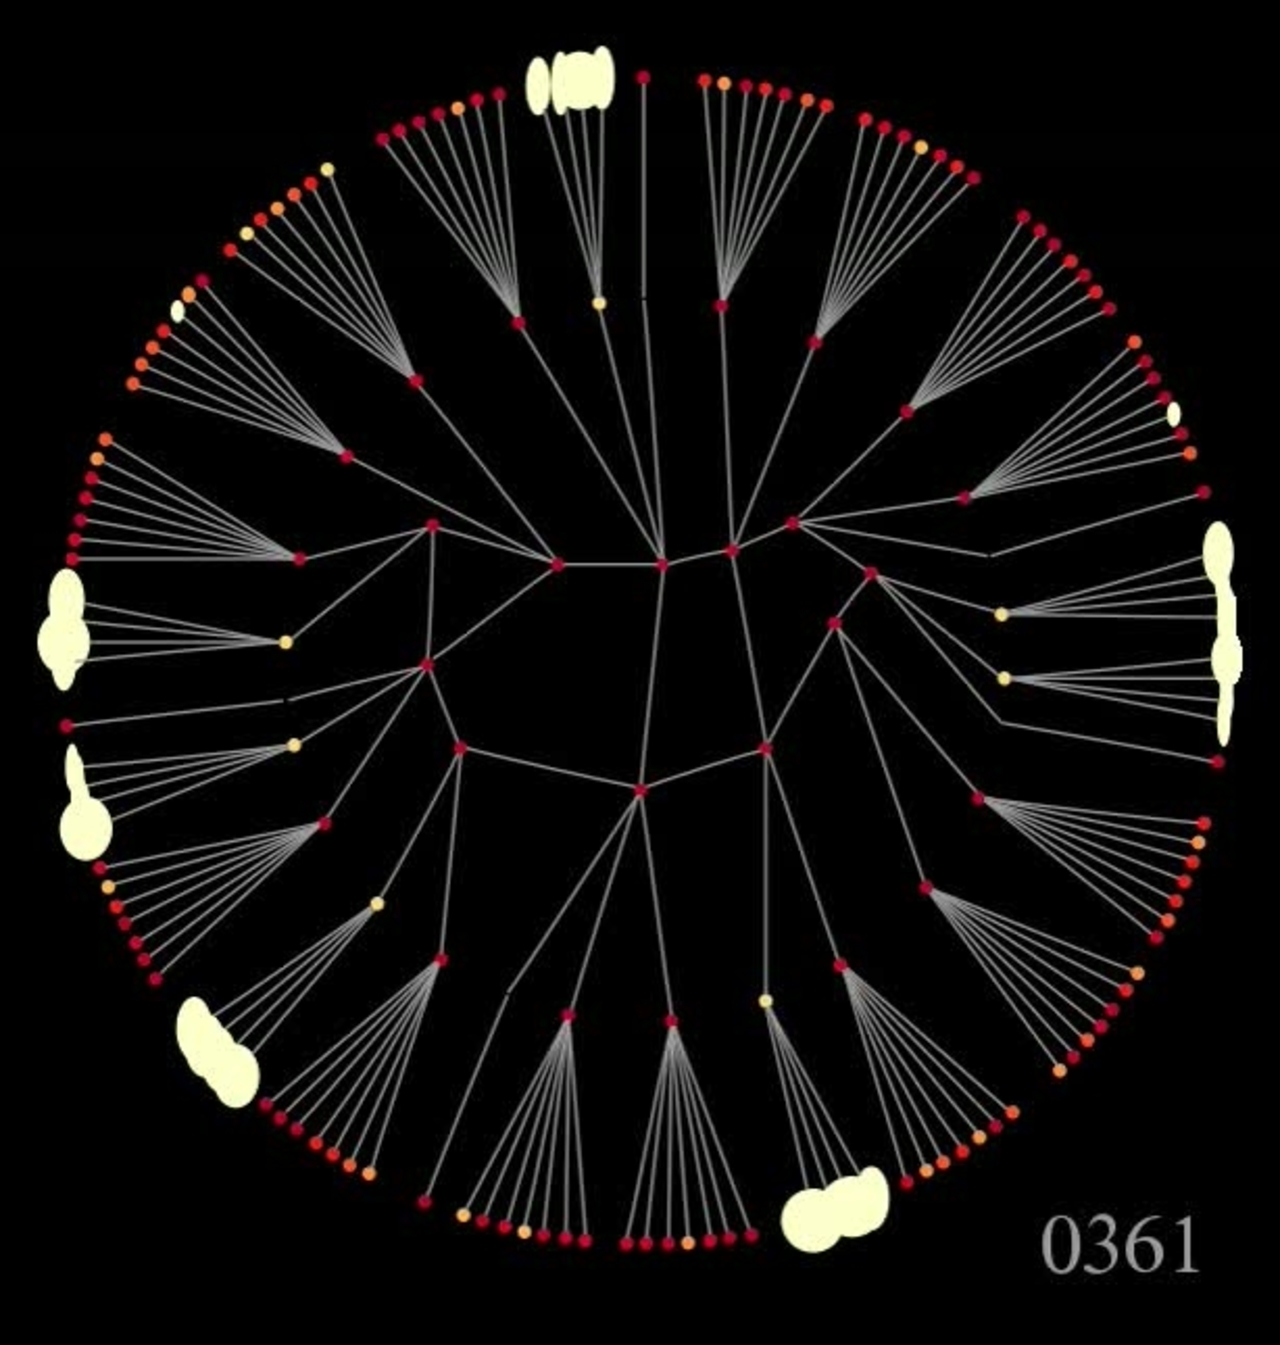 Visualization from a Simulation of a Network Running CTCP